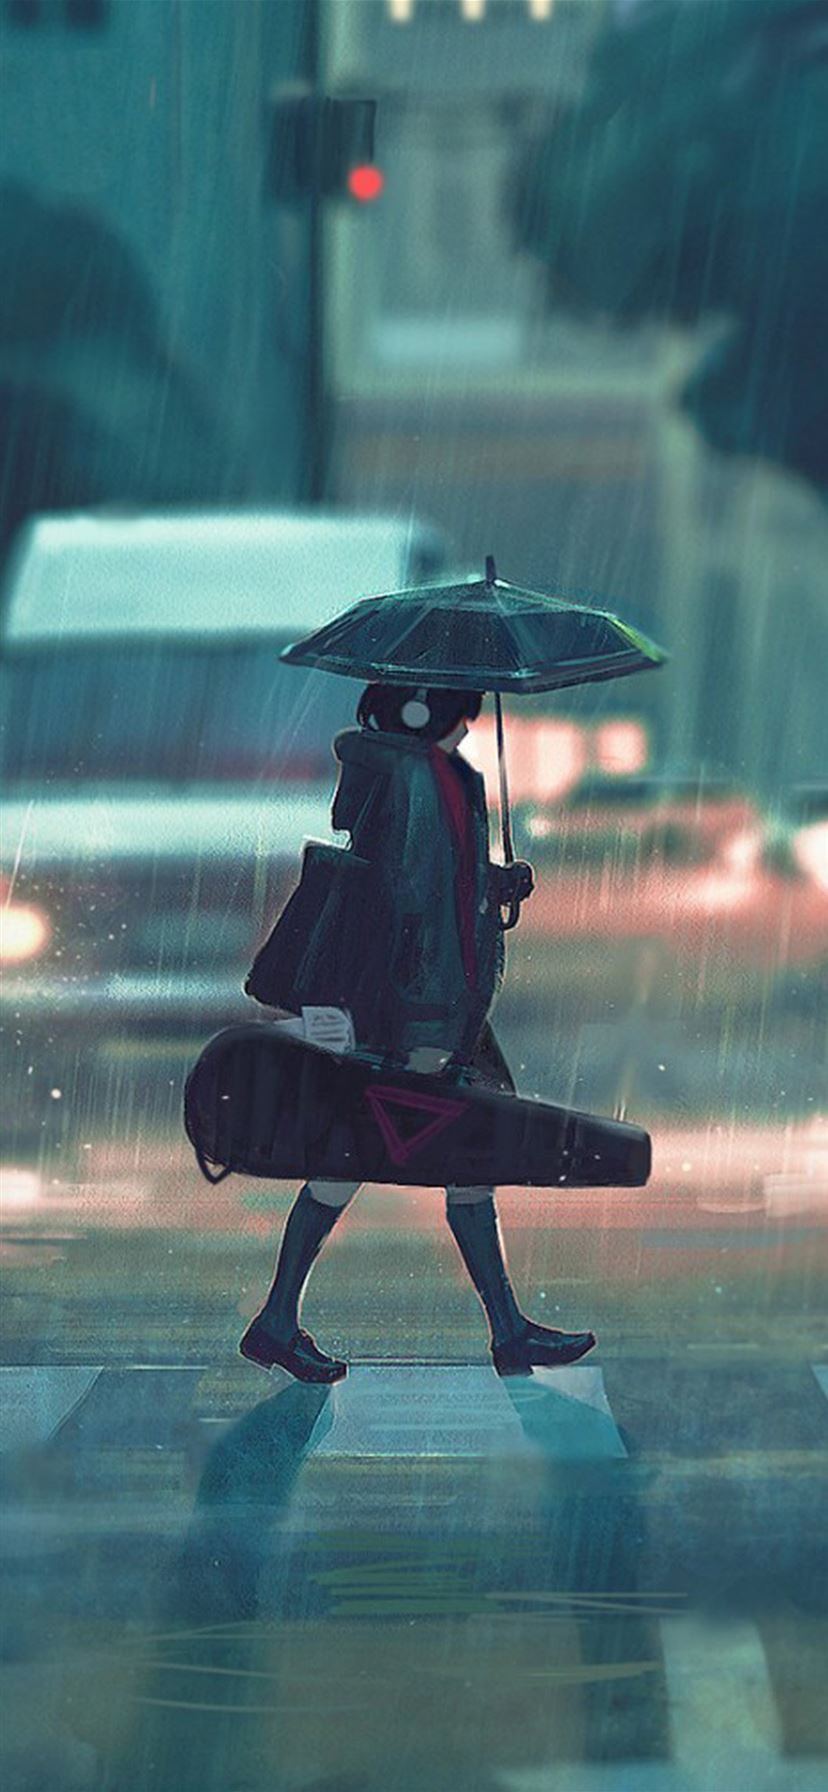 Rainy day anime paint girl iphone wallpapers free download